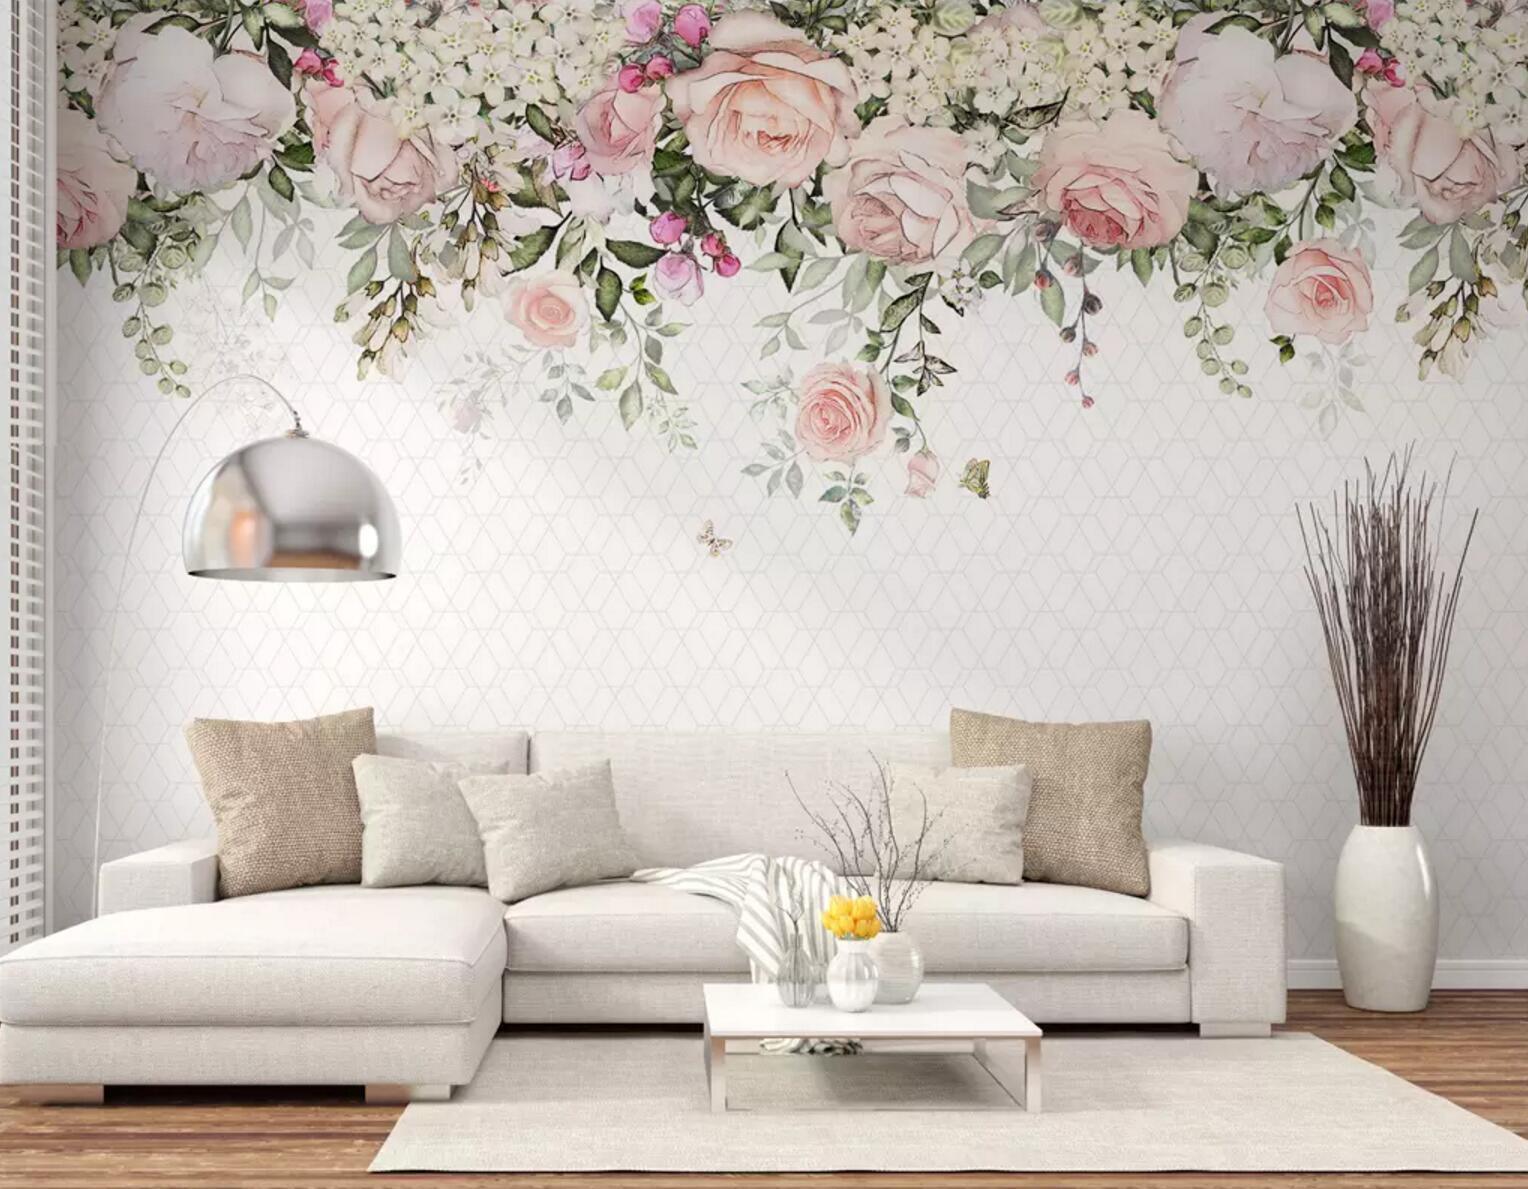 3D Watercolor Bloomy Floral Wall Mural 223- Jess Art Decoration